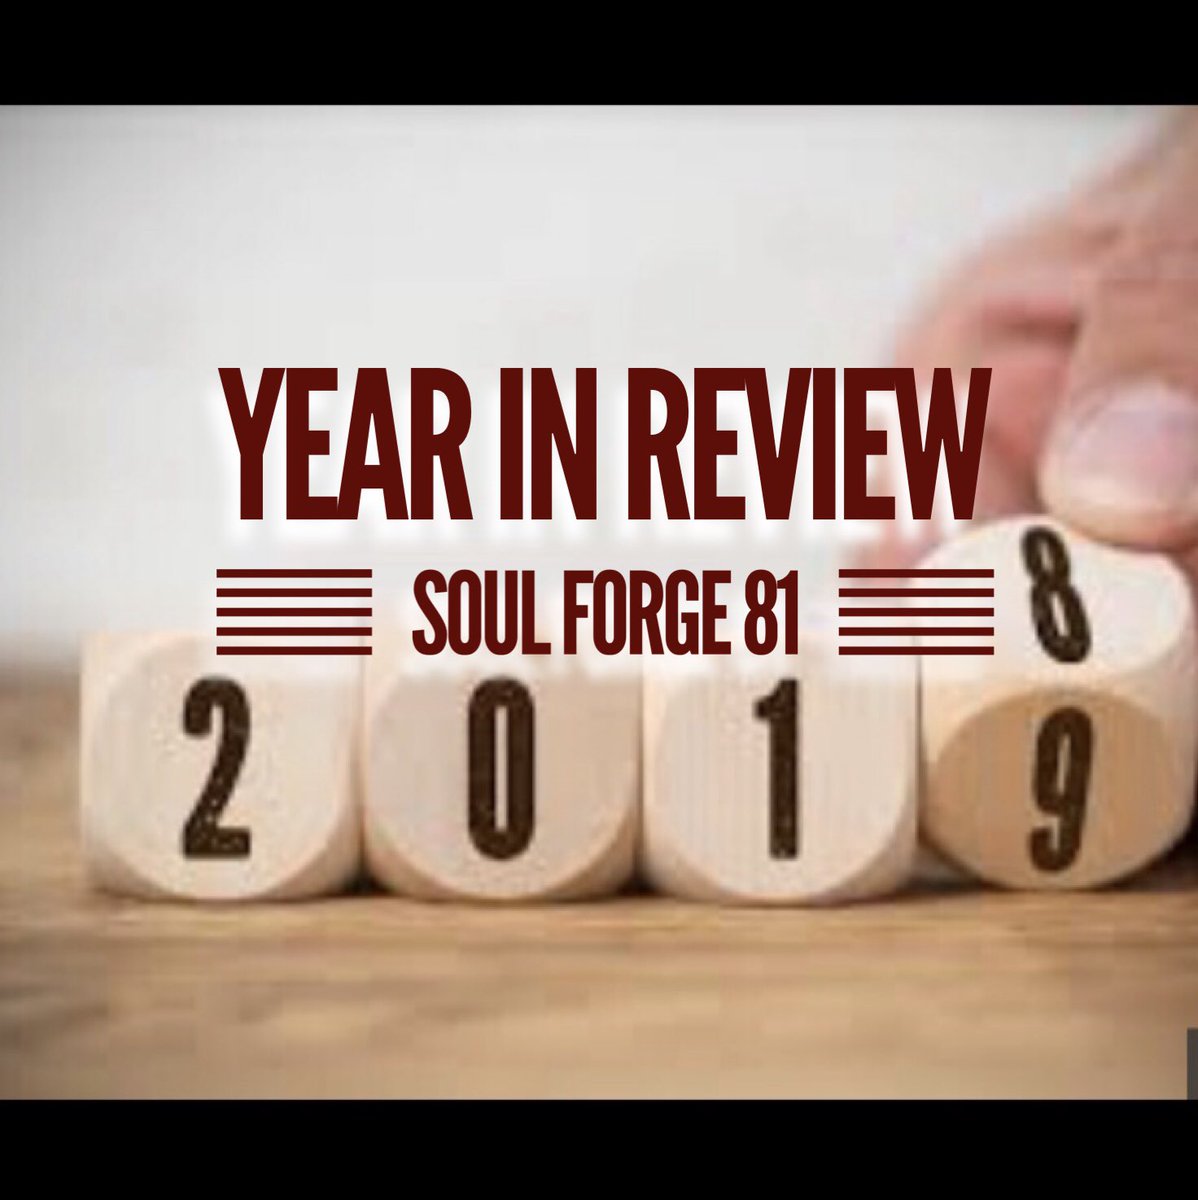 SOUL FORGE PODCAST Year In Review 2018 - 81 podbean.com/media/share/pb… #PodernFamily #ThePWA #Podcasts #Podbean #spotify #TuneIn #PodSociety #podsunited #UnderDogPods #2018inReview